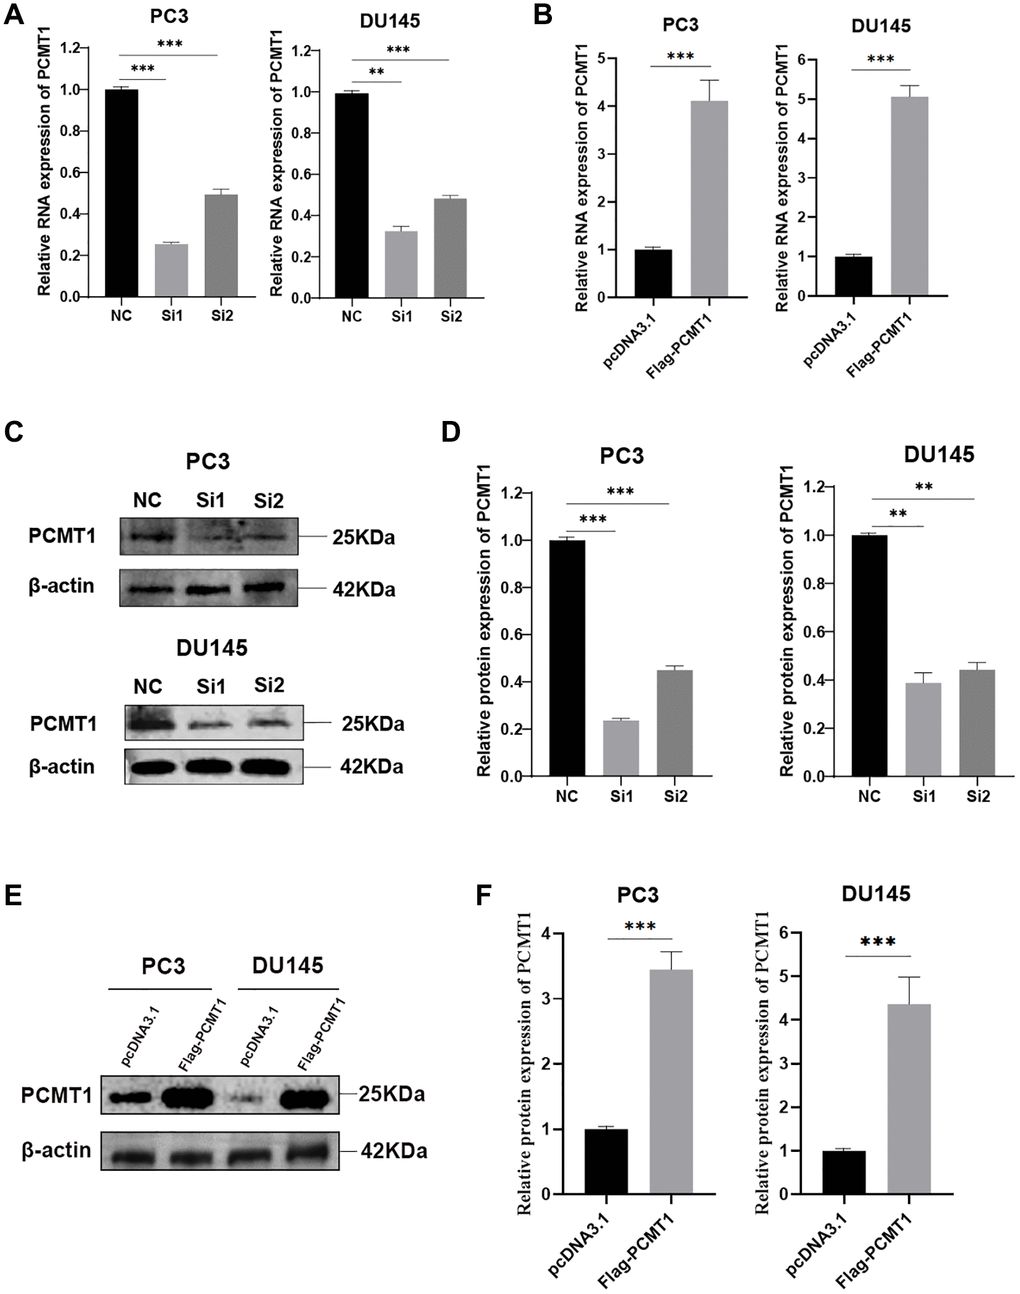 PC3 and DU145 cells transfected with siRNA-PCMT1 down-regulated PCMT1 expression and Flag-PCMT1 up-regulated PCMT1 expression. (A, B) siRNA-PCMT1 transfection down-regulated PCMT1 mRNA expression of PC3 and DU145 cells, respectively. (C, D) siRNA-PCMT1 transfection down-regulated PCMT1 protein expression of PC3 and DU145 cells. (E, F) Flag-PCMT1 transfection up-regulated PCMT1 protein expression of PC3 and DU145 cells. Data are presented as mean ± SD of at least three experiments. **P ***P 